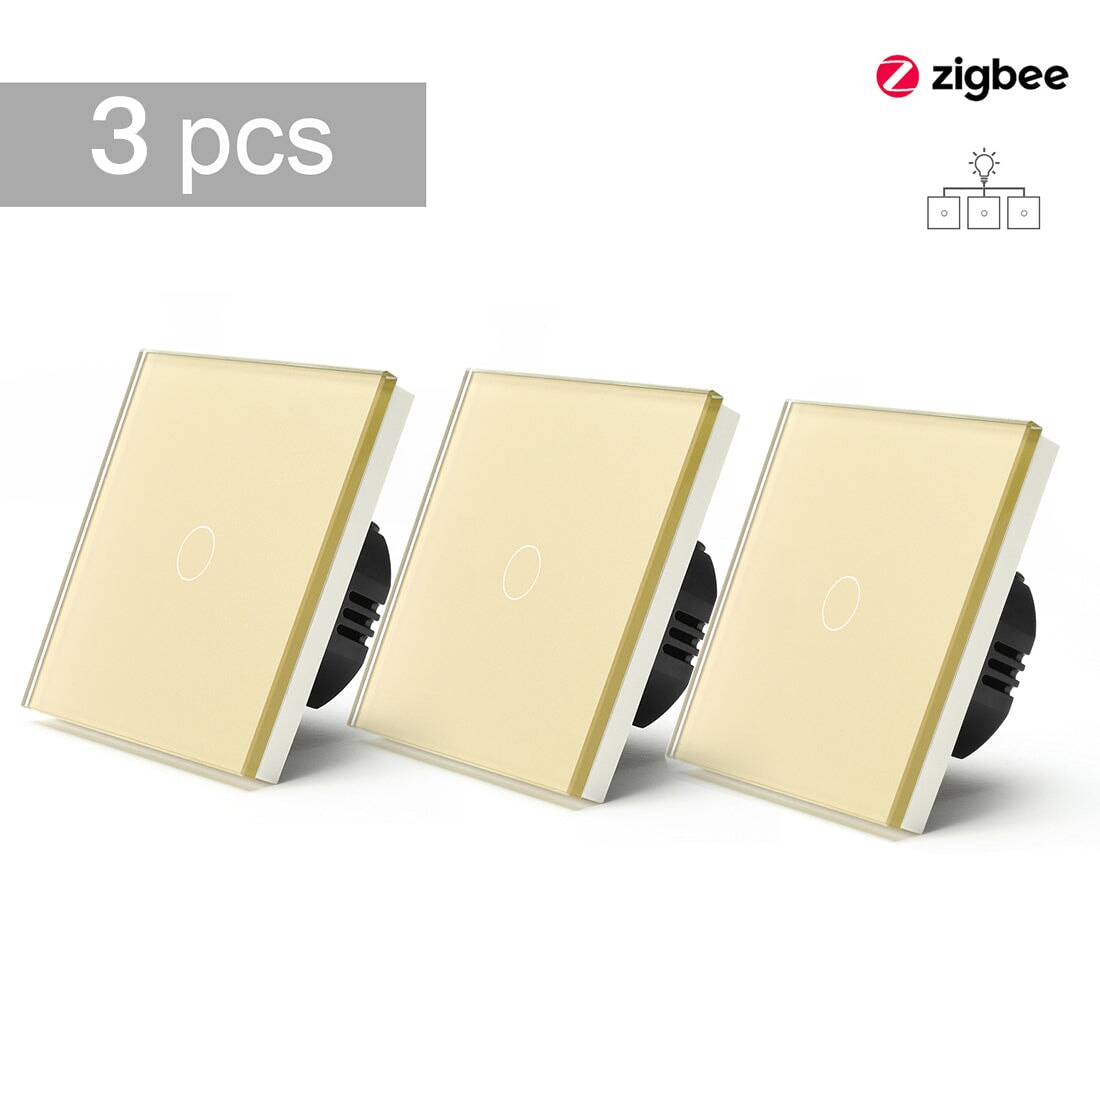 BSEED Zigbee Single Live Line Switch 1/2/3 Gang 1/2/3 Way Wall Smart Light Switch Single Live Line 1/2/3 pack Light Switches Bseedswitch Golden 1Gang 3 Pcs/Pack